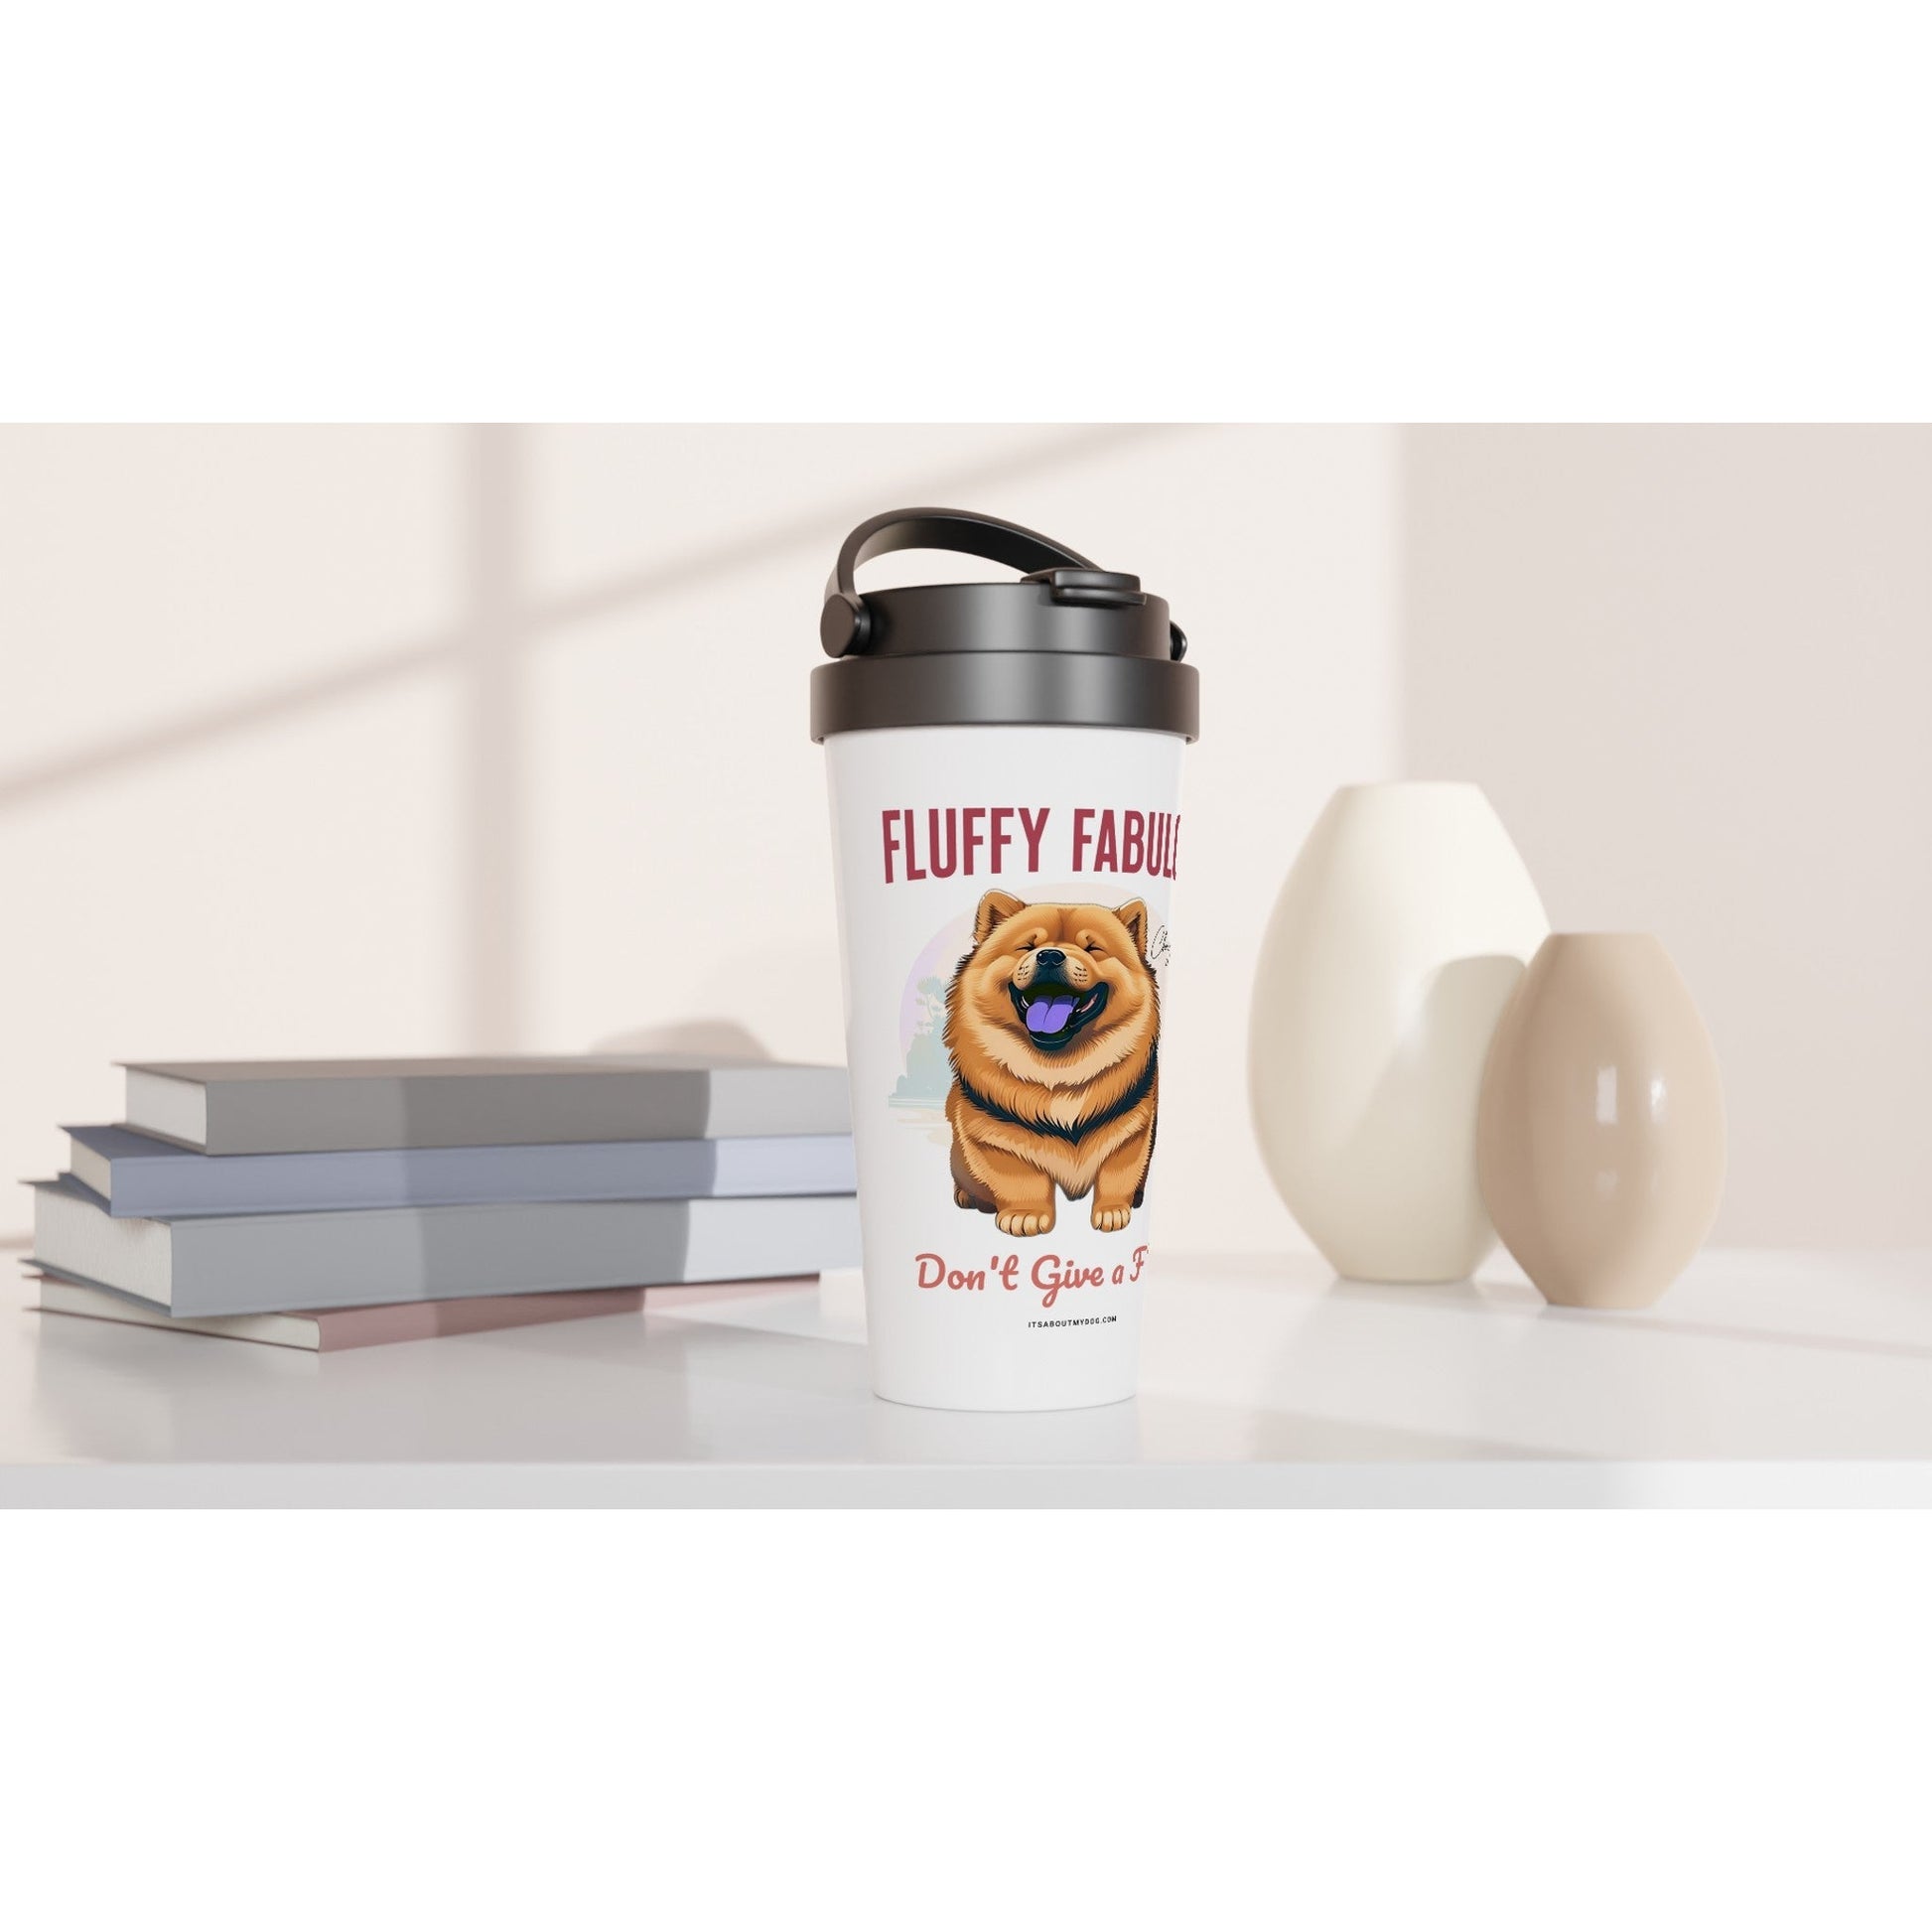 Chow Chow-15oz Stainless Steel Tumbler/Travel Mug29.99-(FREE Delivery) Shop now at itsaboutmydog.com, Chow Chow Dog Art, chow chow dog gifts, chow chow for sale, serengeti dog tumbler, Travel Mug, Travel mug for daddy, tumbler for couple